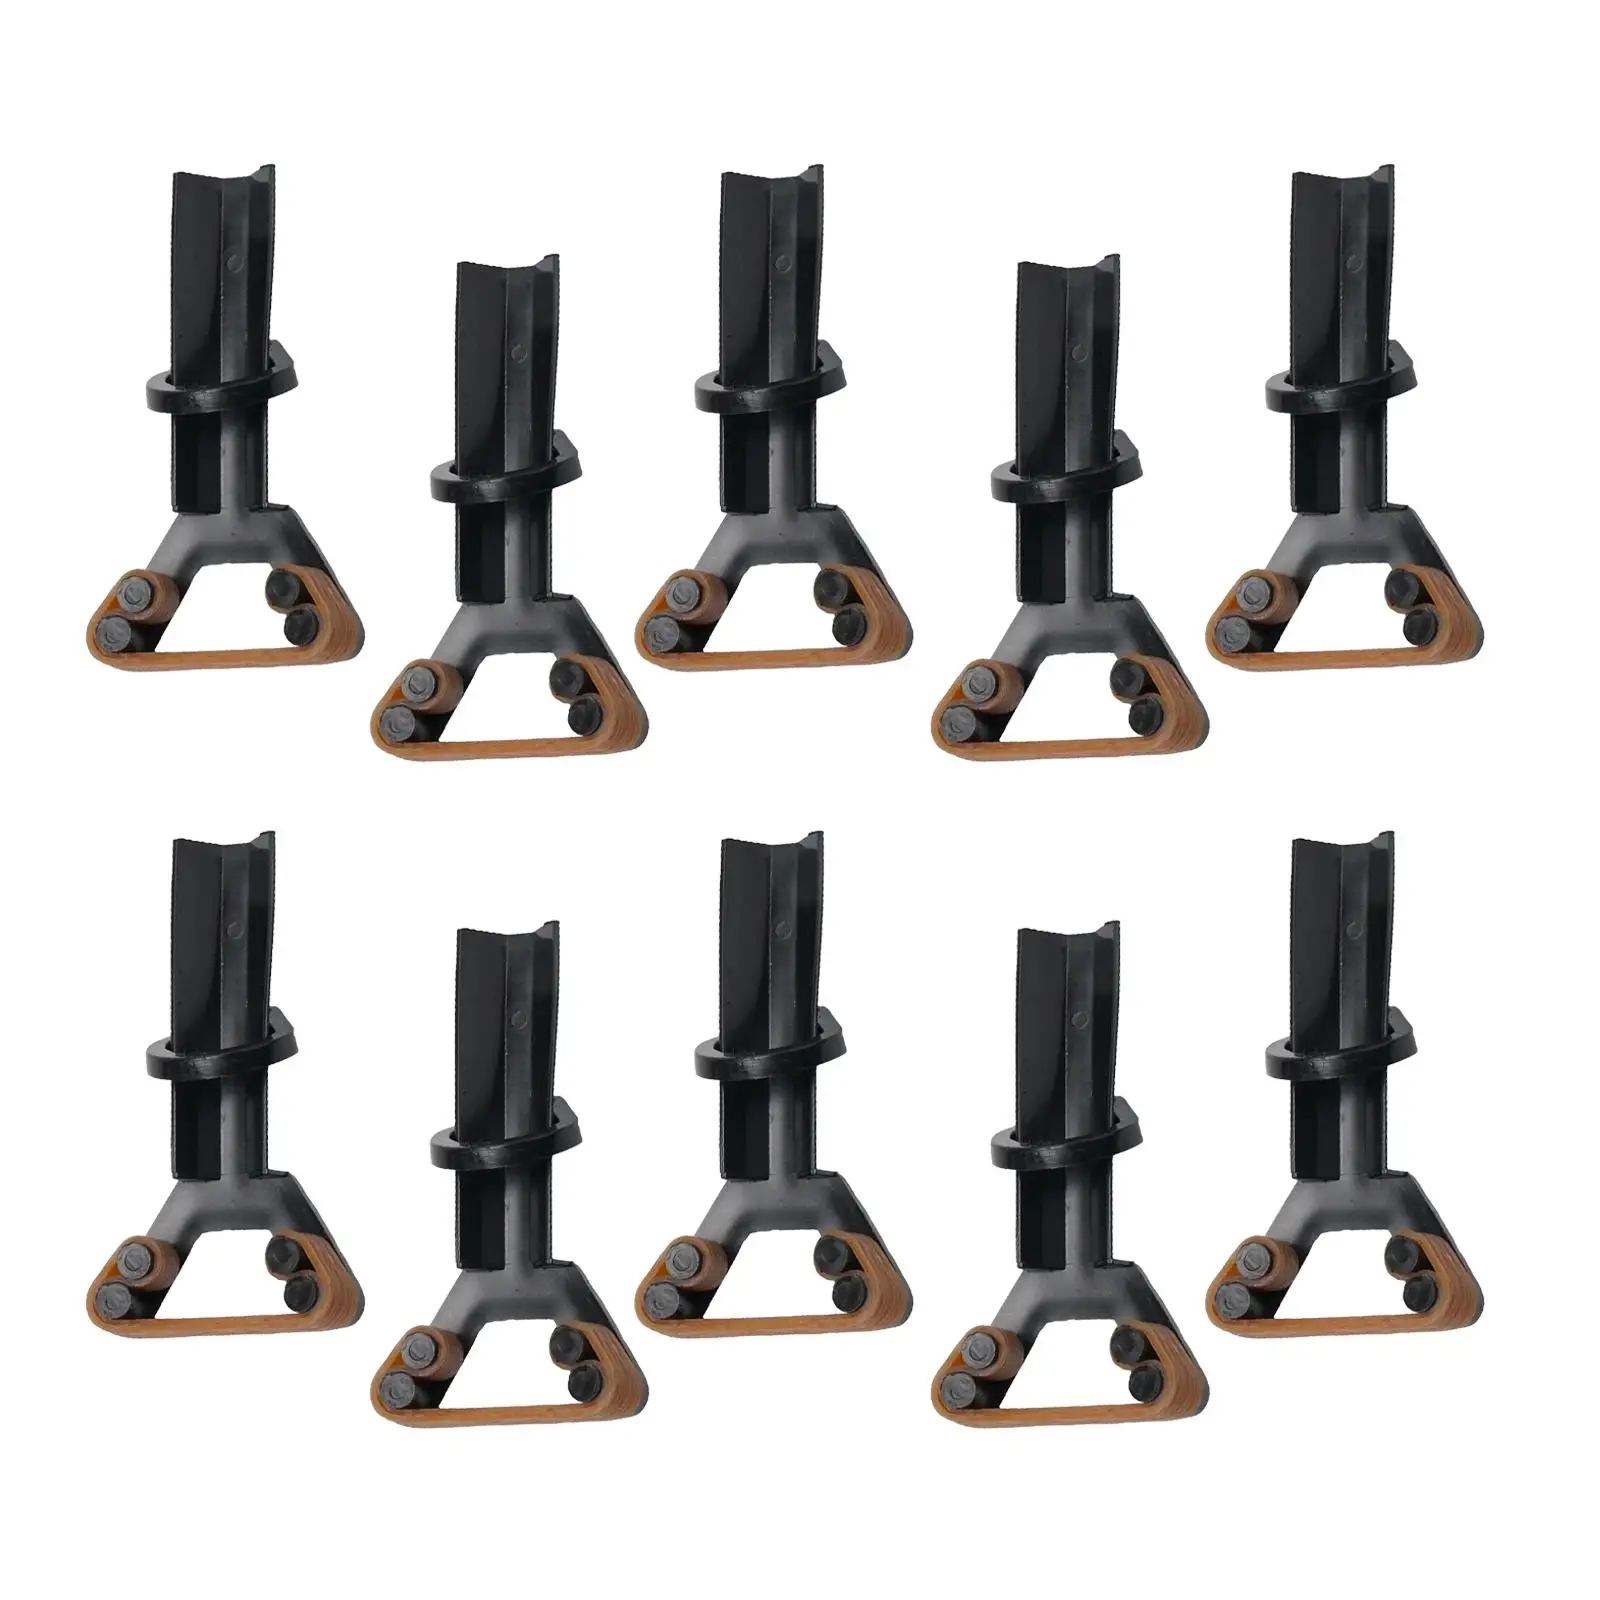 10x Pool Cue Tip Clamp Adults Portable Elastic Replacement Y Shaped Billiard Cue Tip Clamp for Games Player Snooker Indoor Home